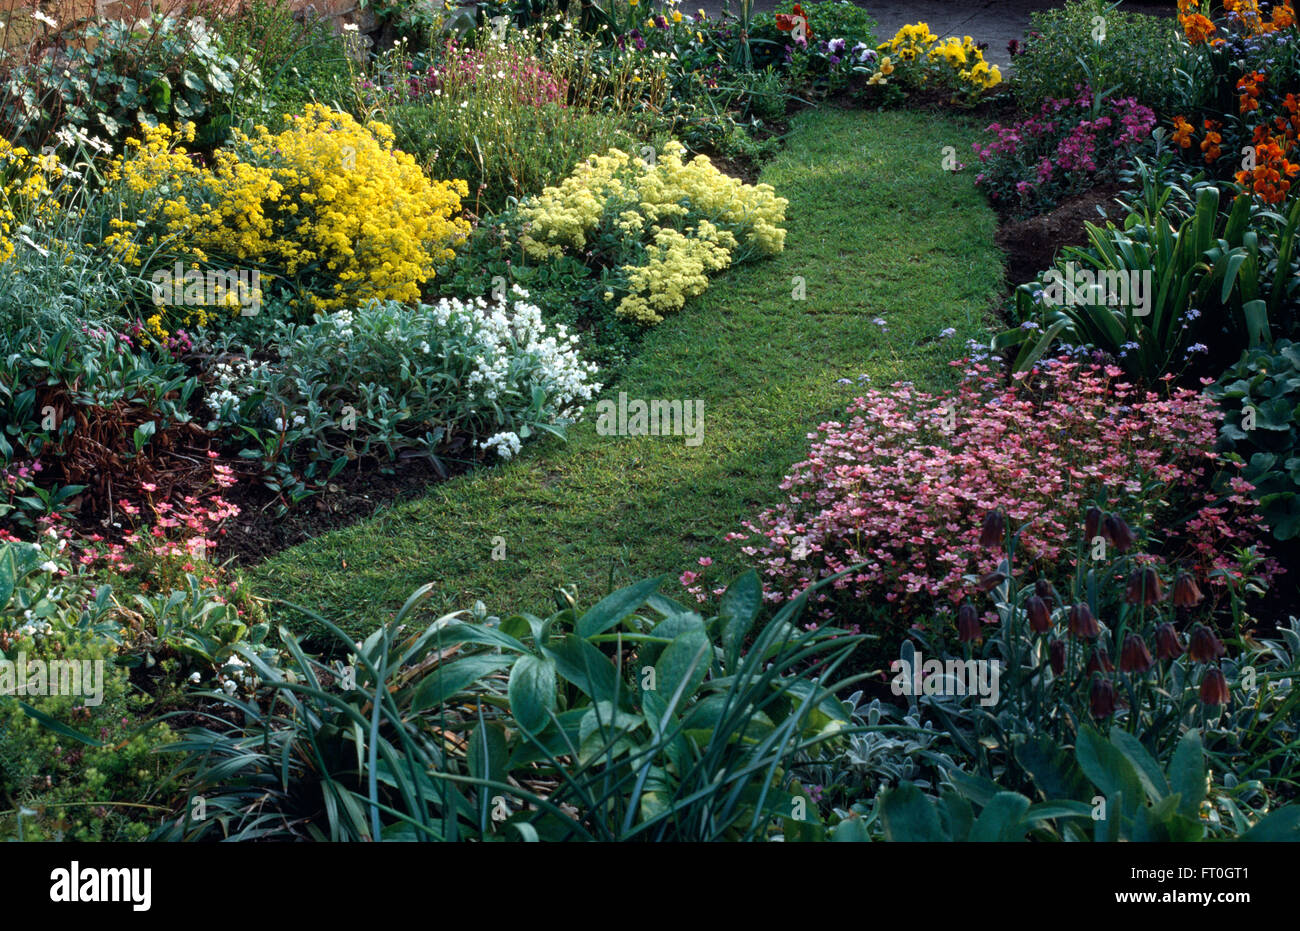 Colorful perennials in summer borders either side of a grass path Stock Photo